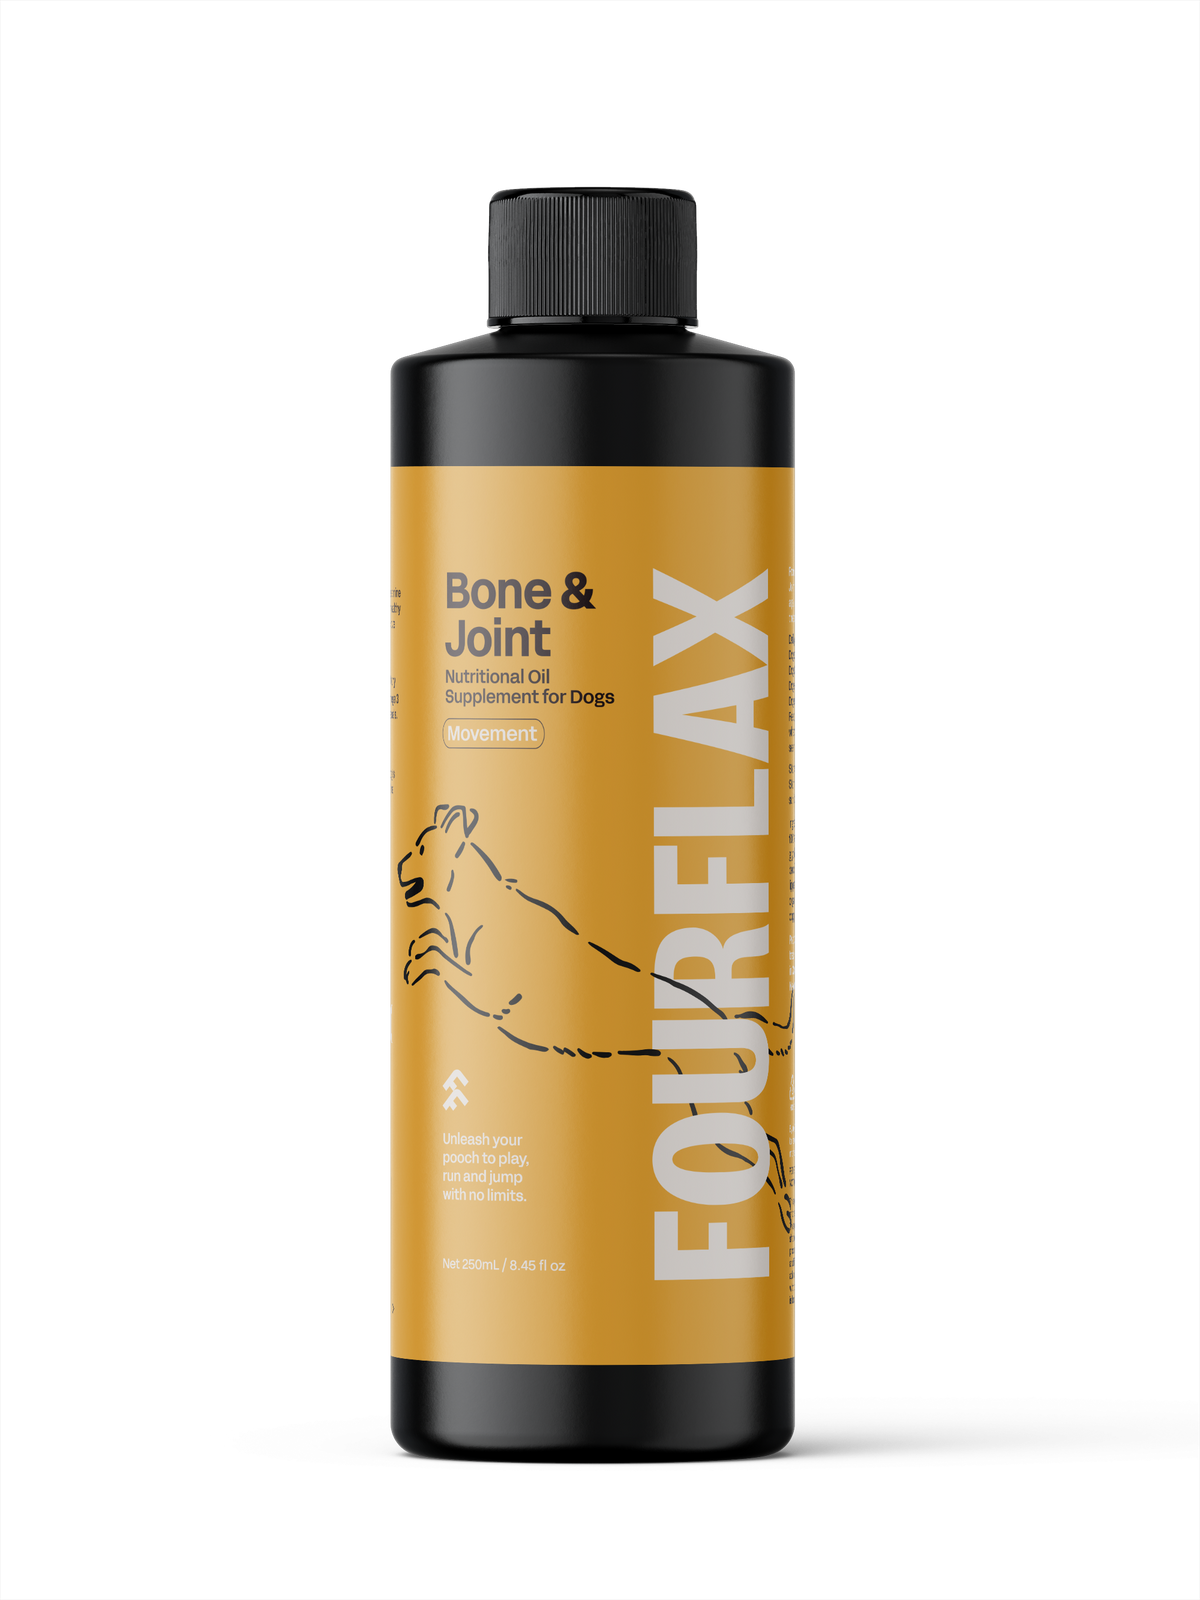 Fourflax bone and joint oil 250ml